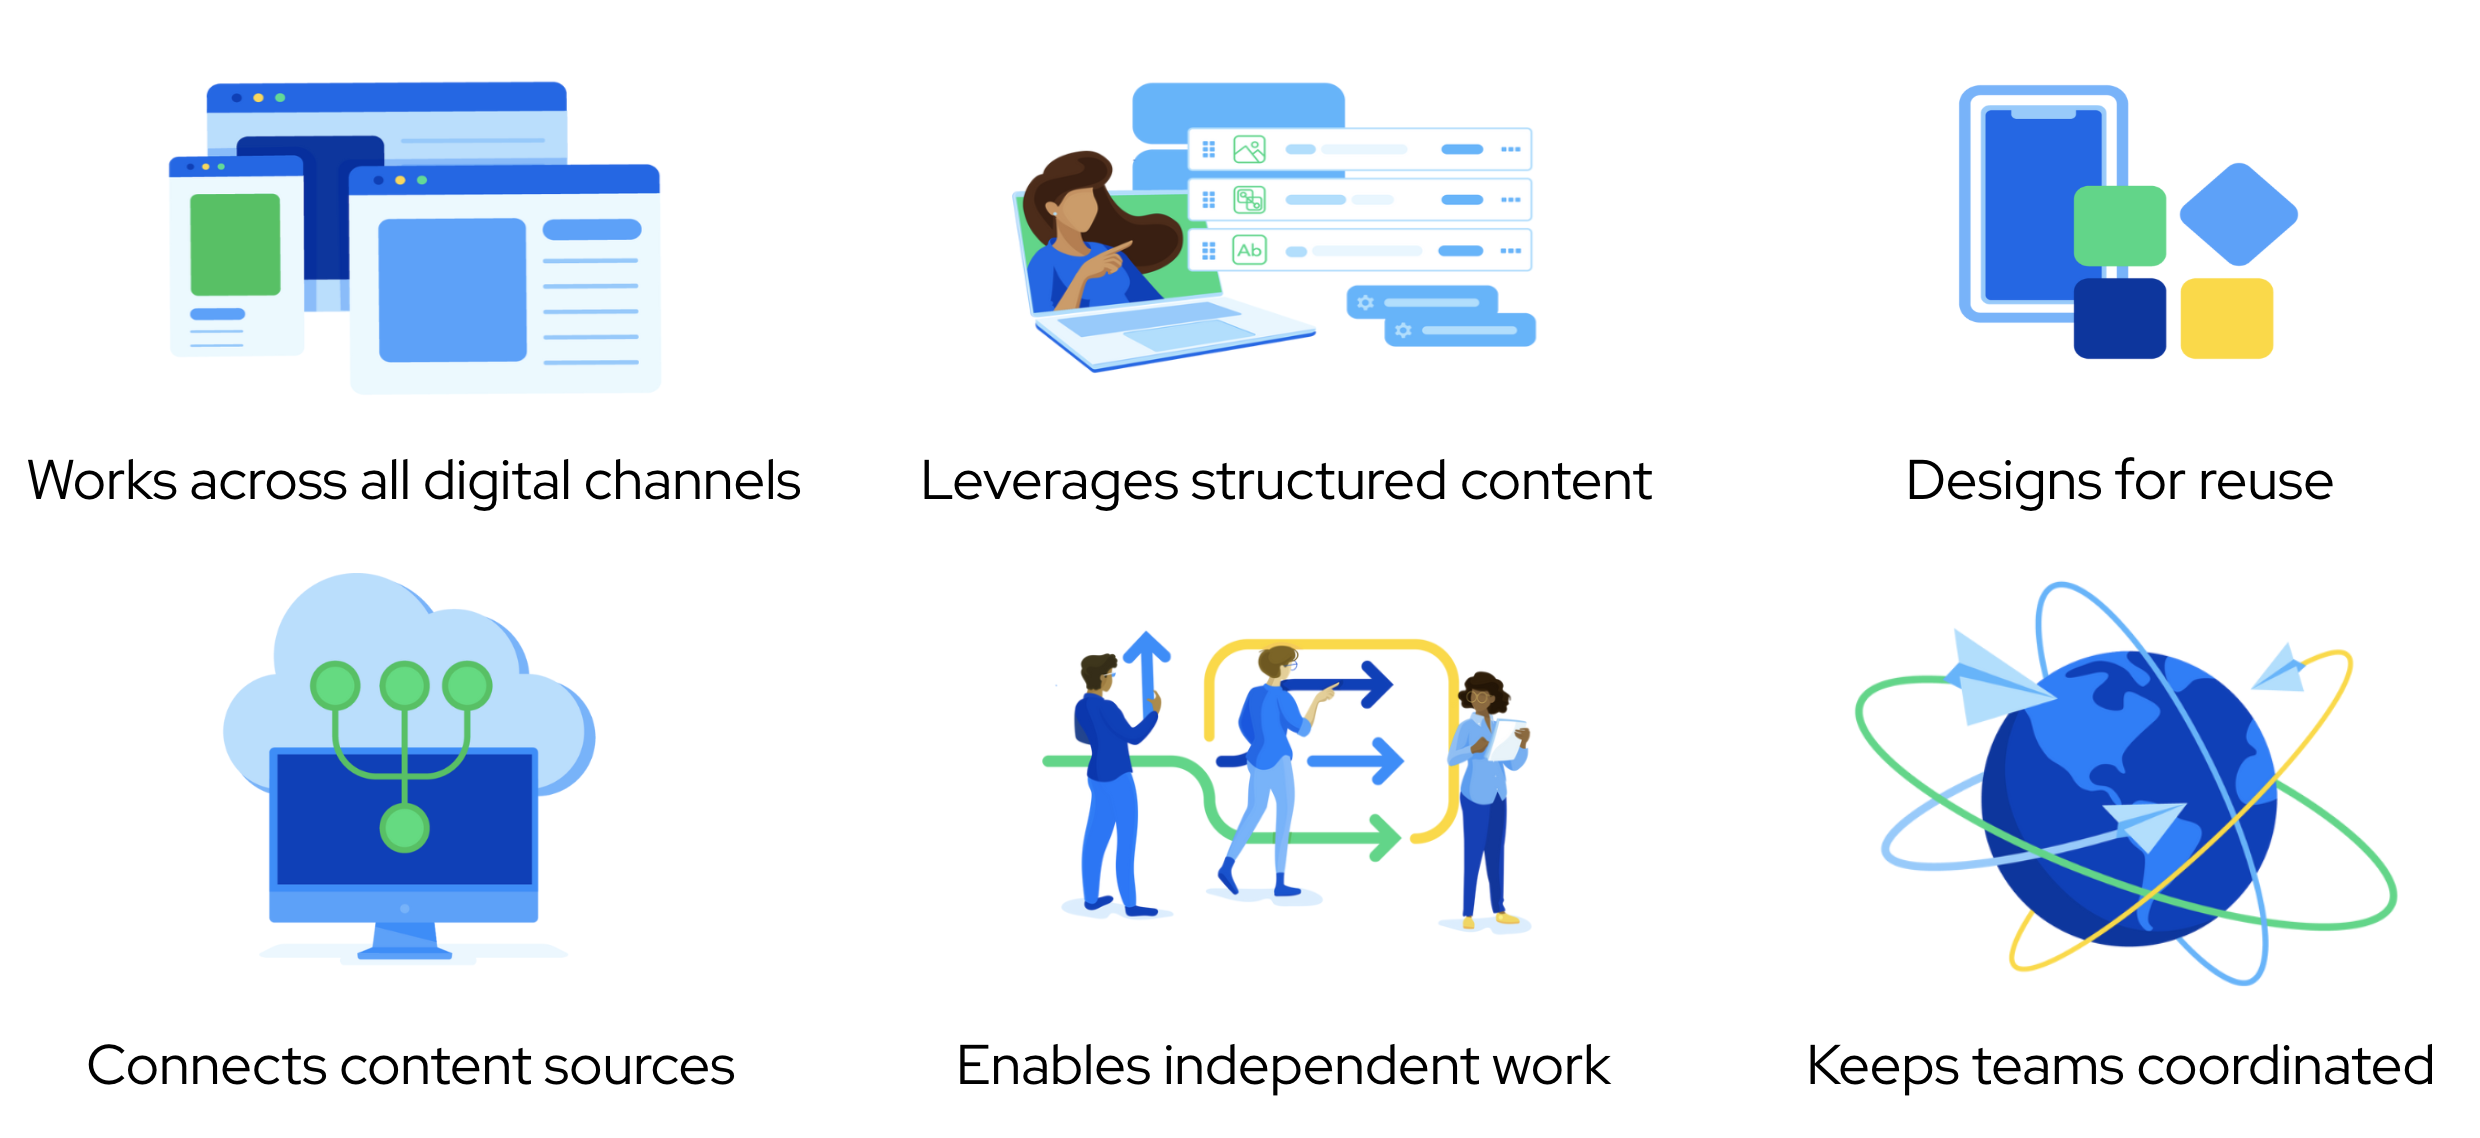 Composable content offers six core attributes that enable marketers to work more effectively across digital channels and manage content at scale